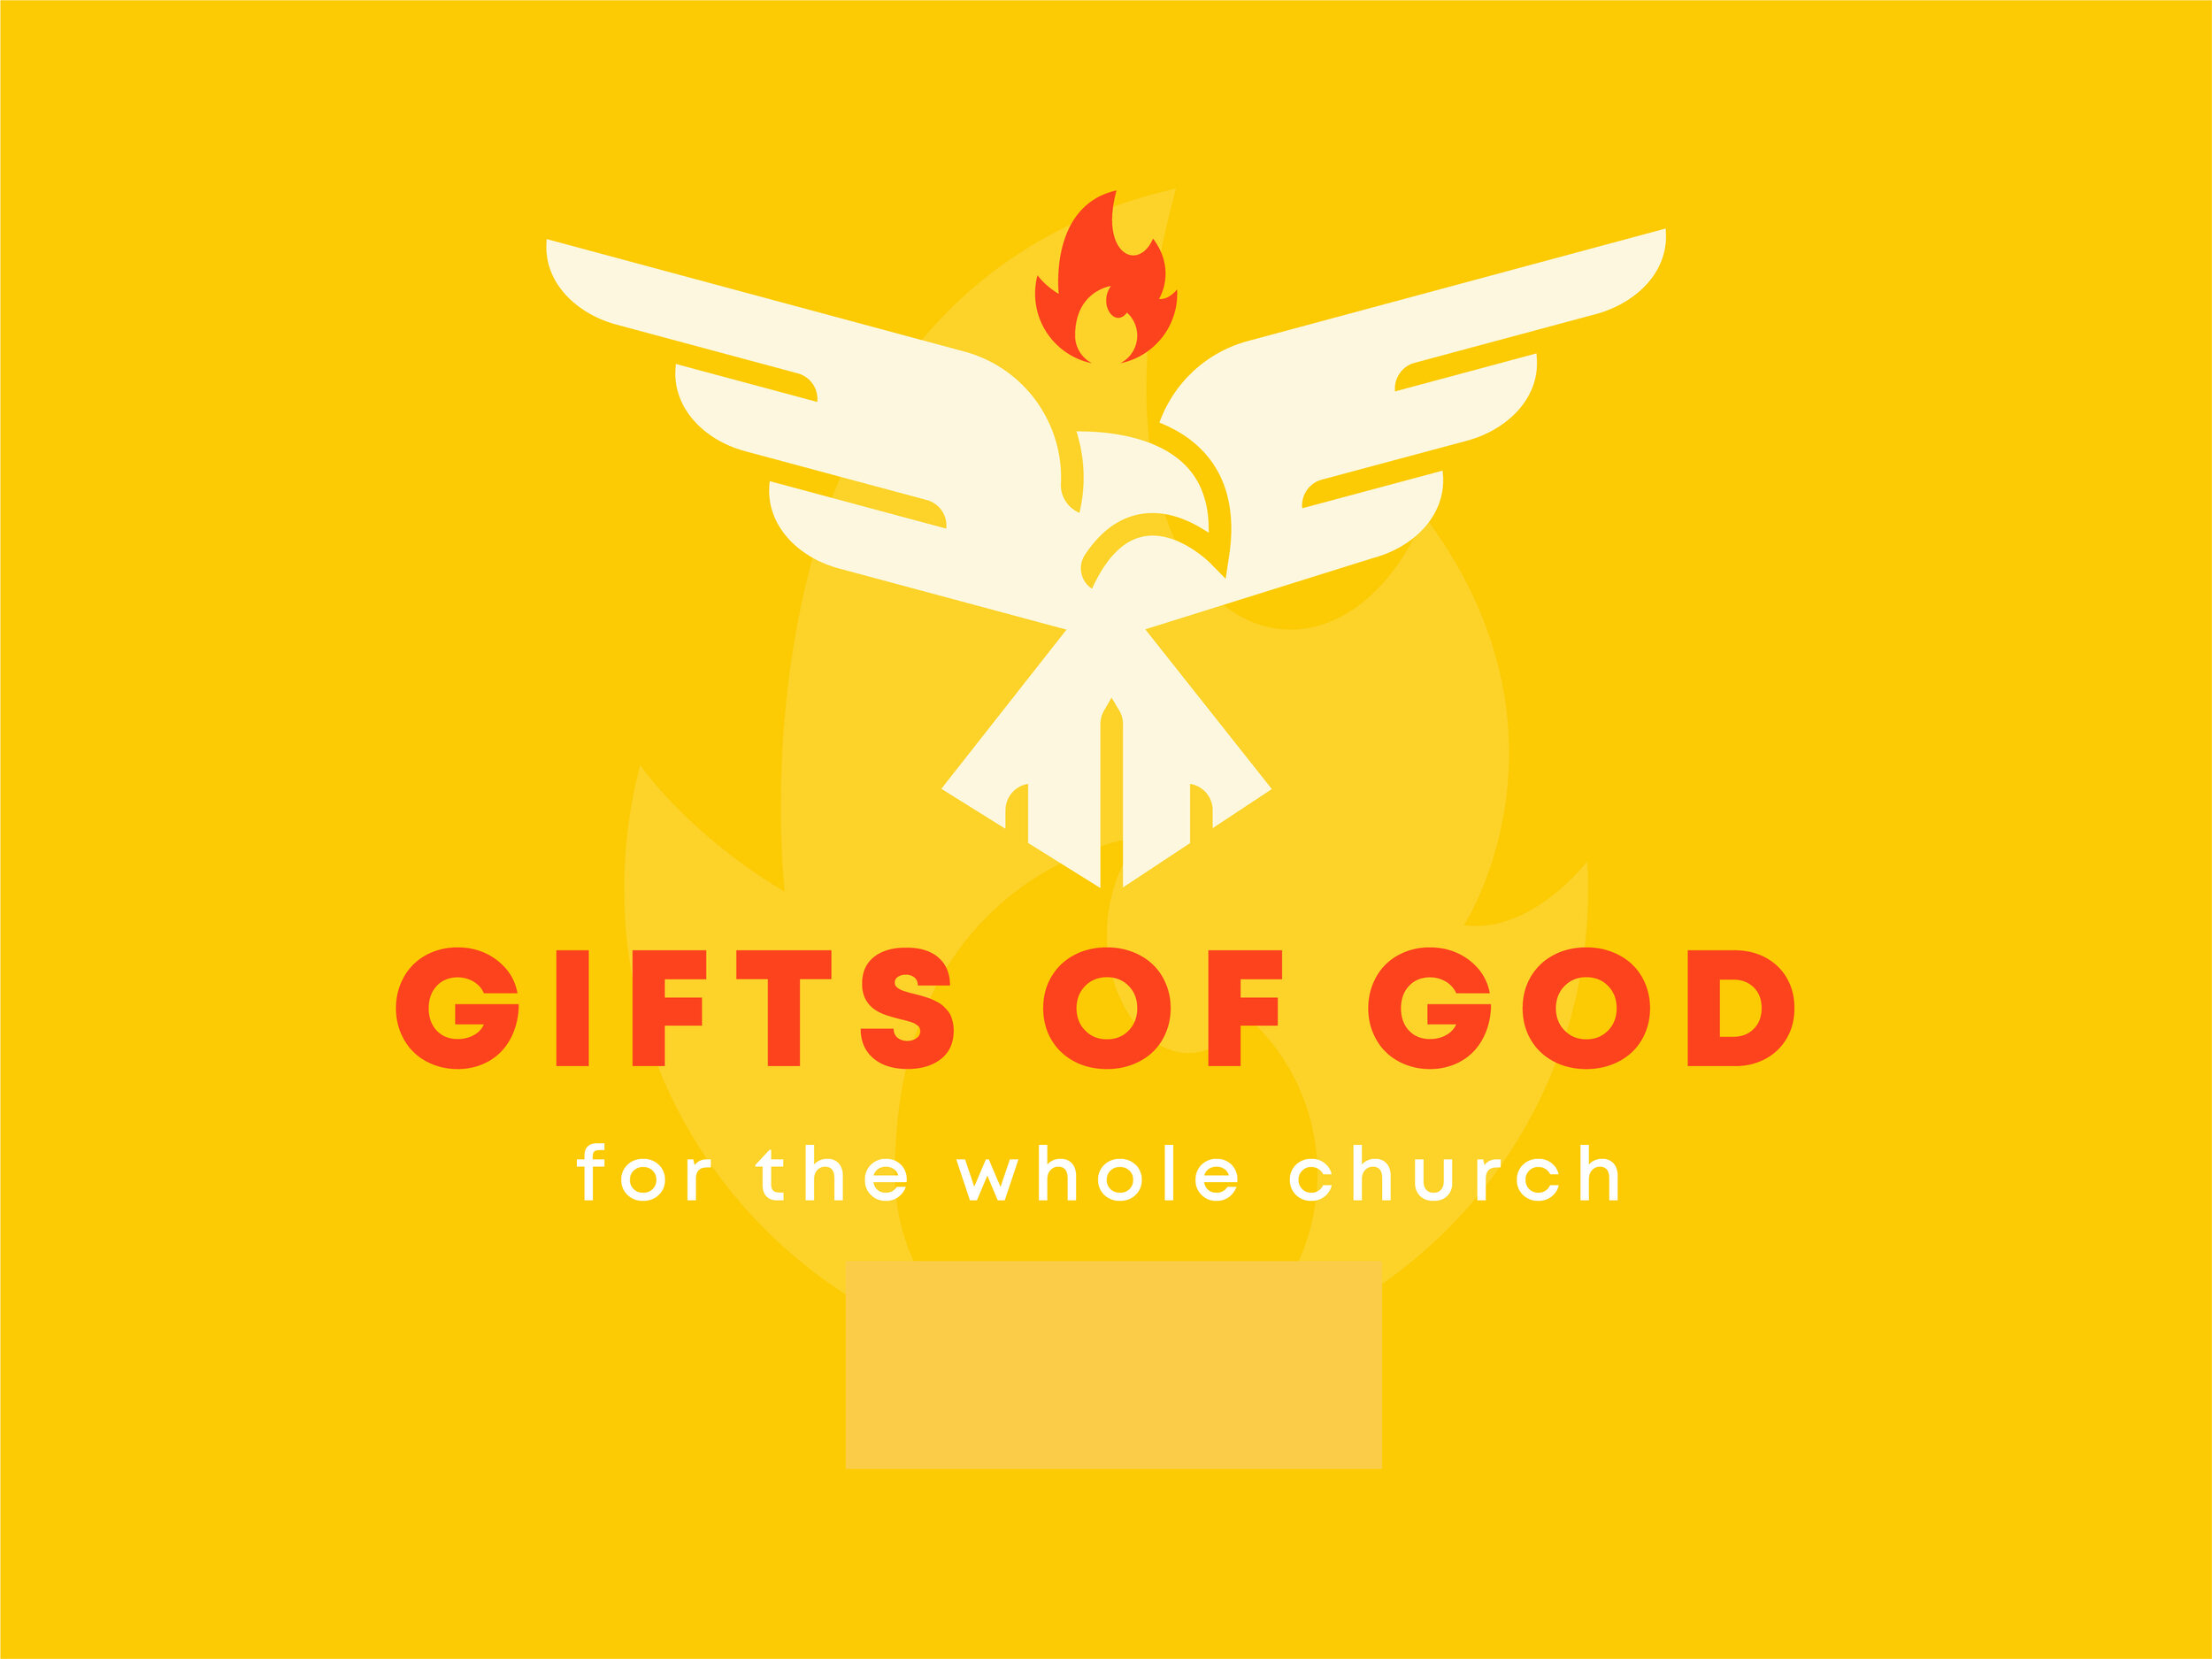 gifts of the father